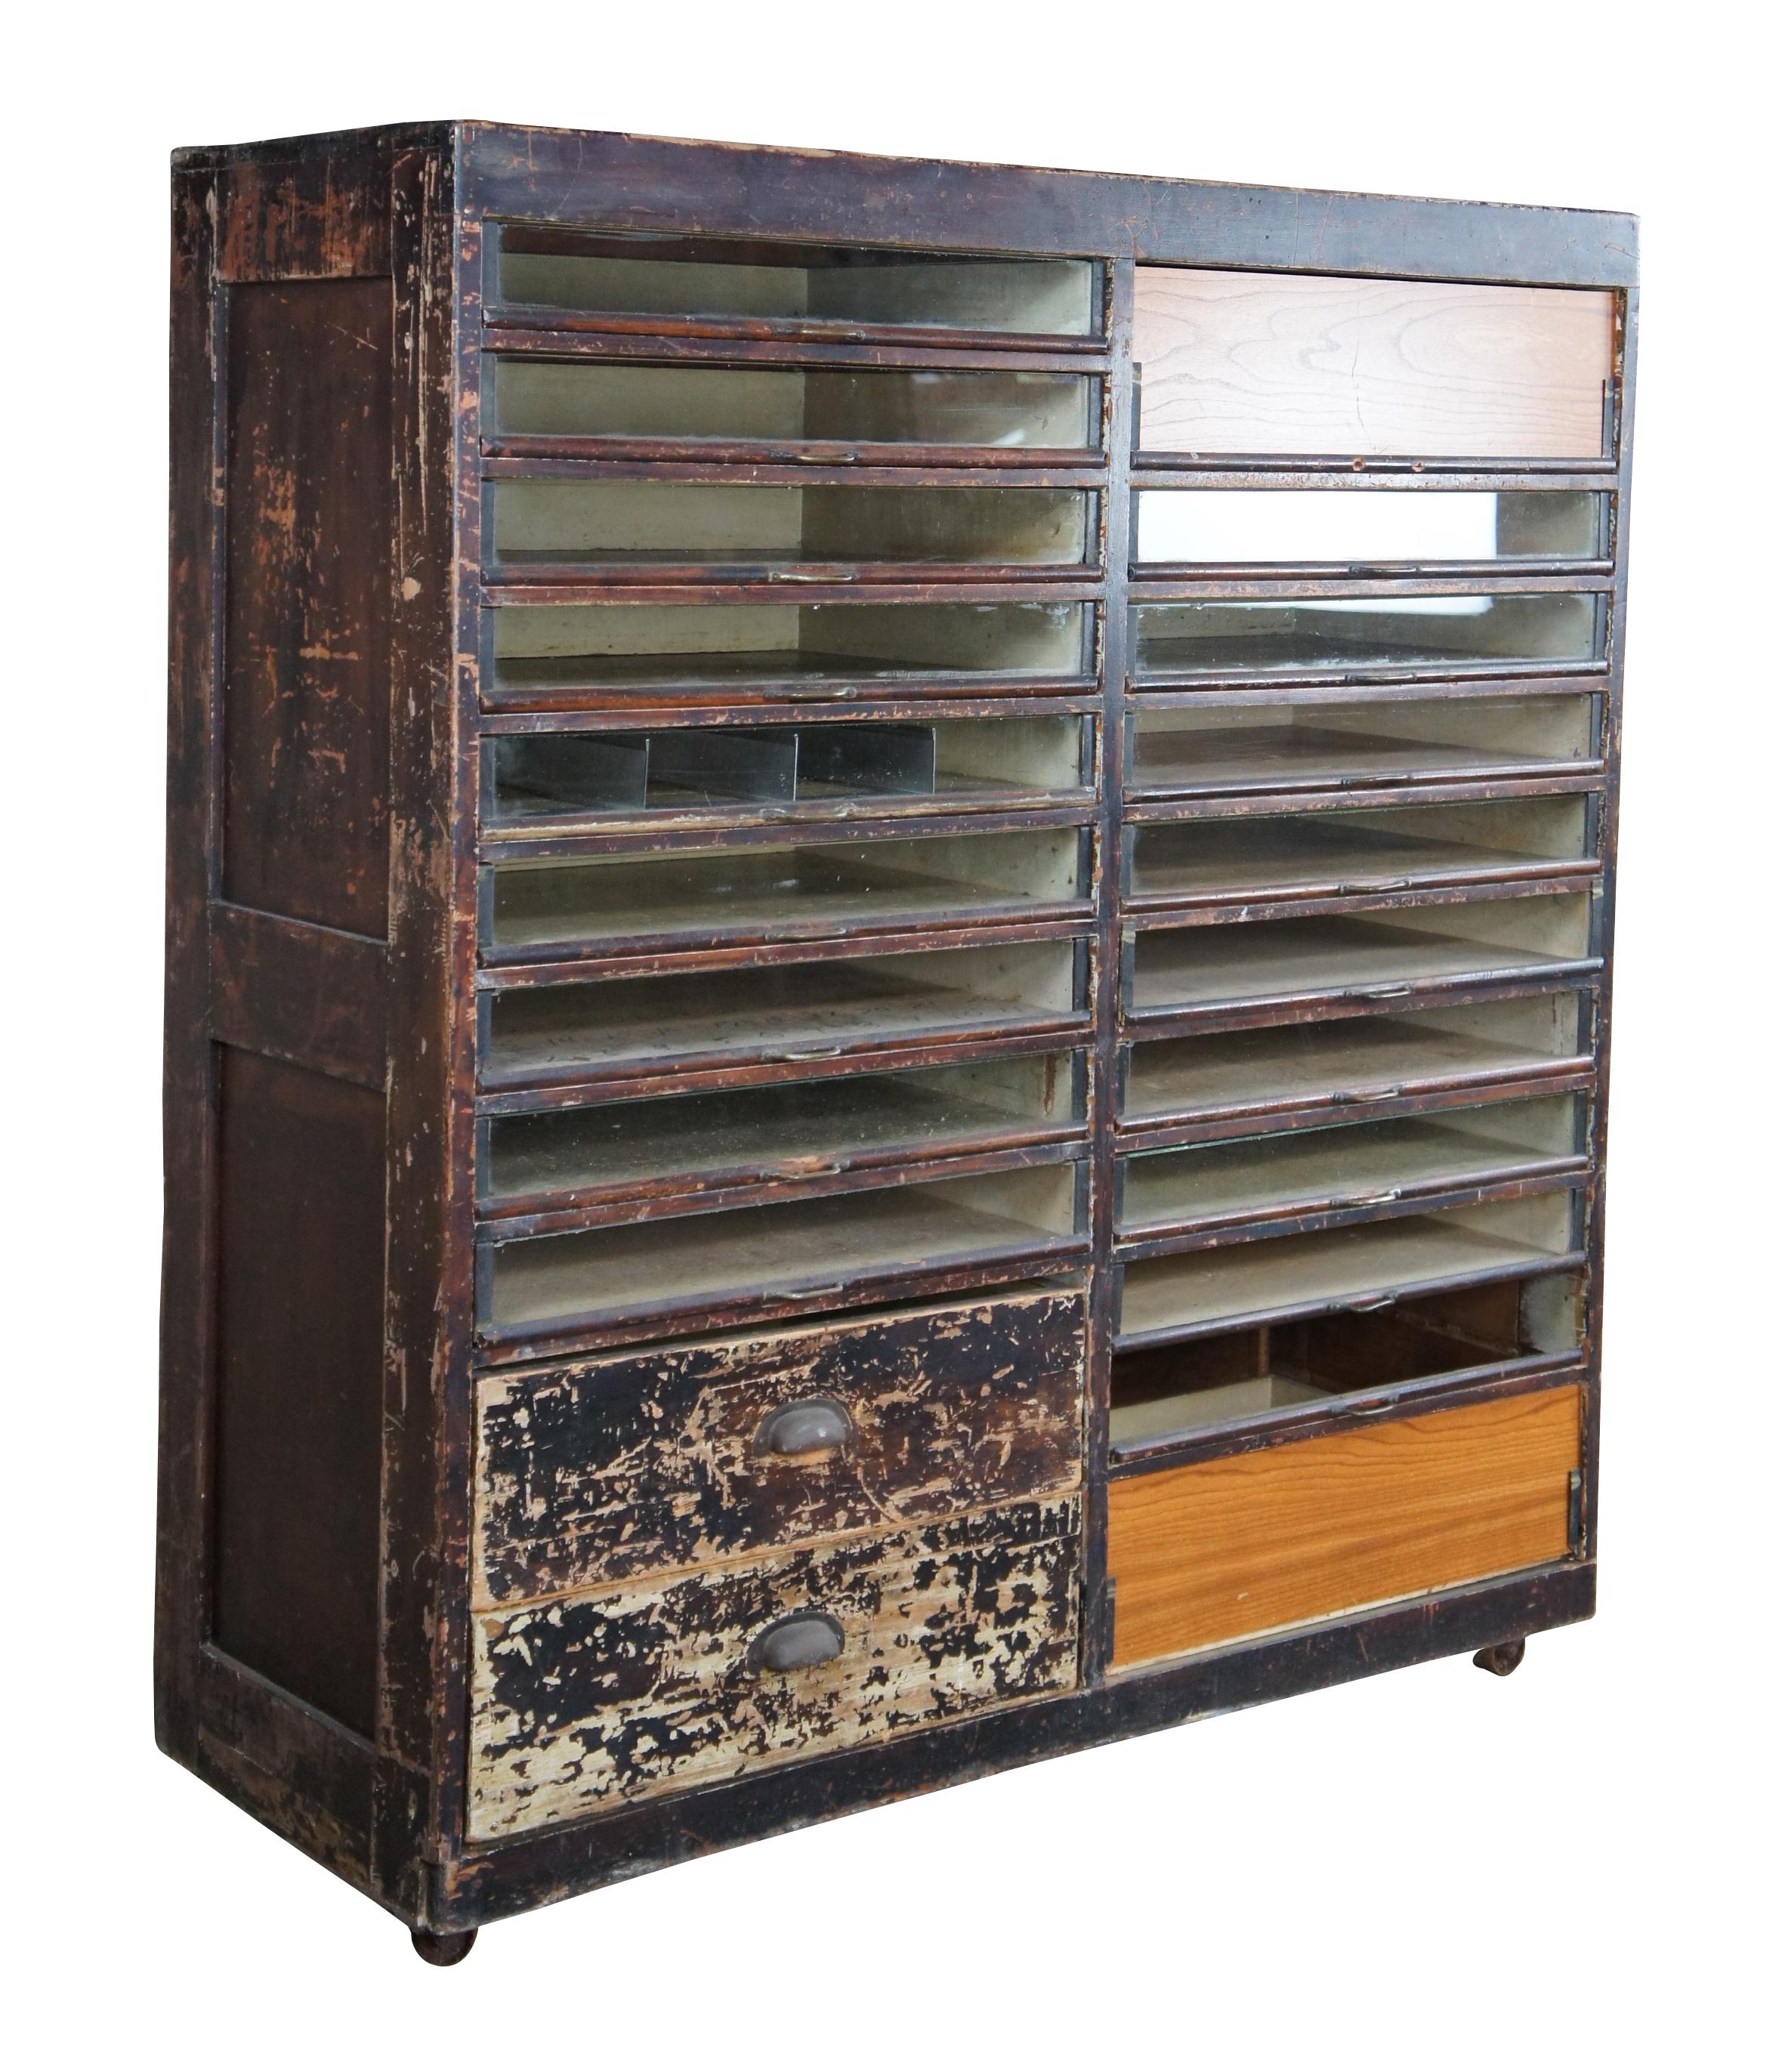 Antique apothecary cabinet, circa first half 20th century. Features a unique file system with clear plexi windows along the front. Includes 2 lower drawers along the left. Size: 50